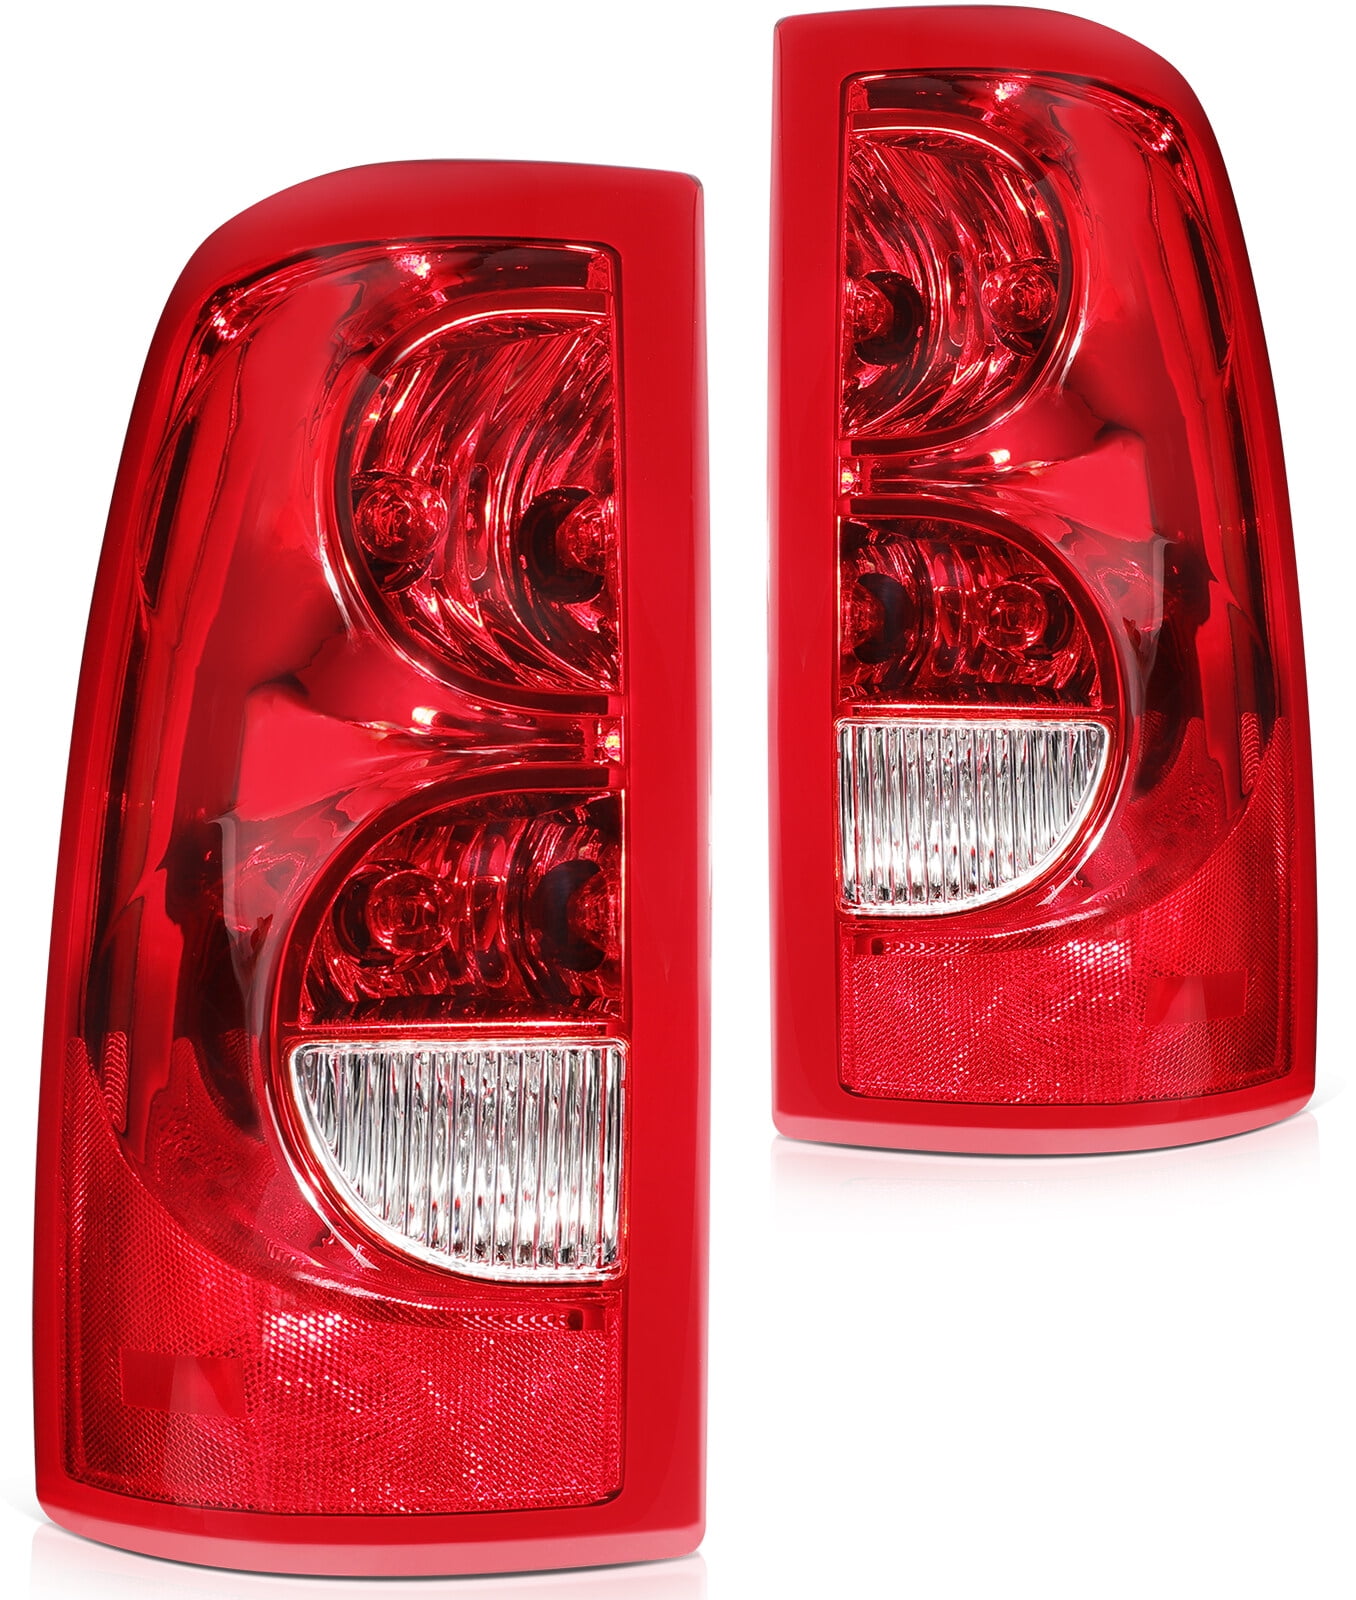 ECOTRIC Rear Tail Lights Taillights Passenger Side Brake Signal